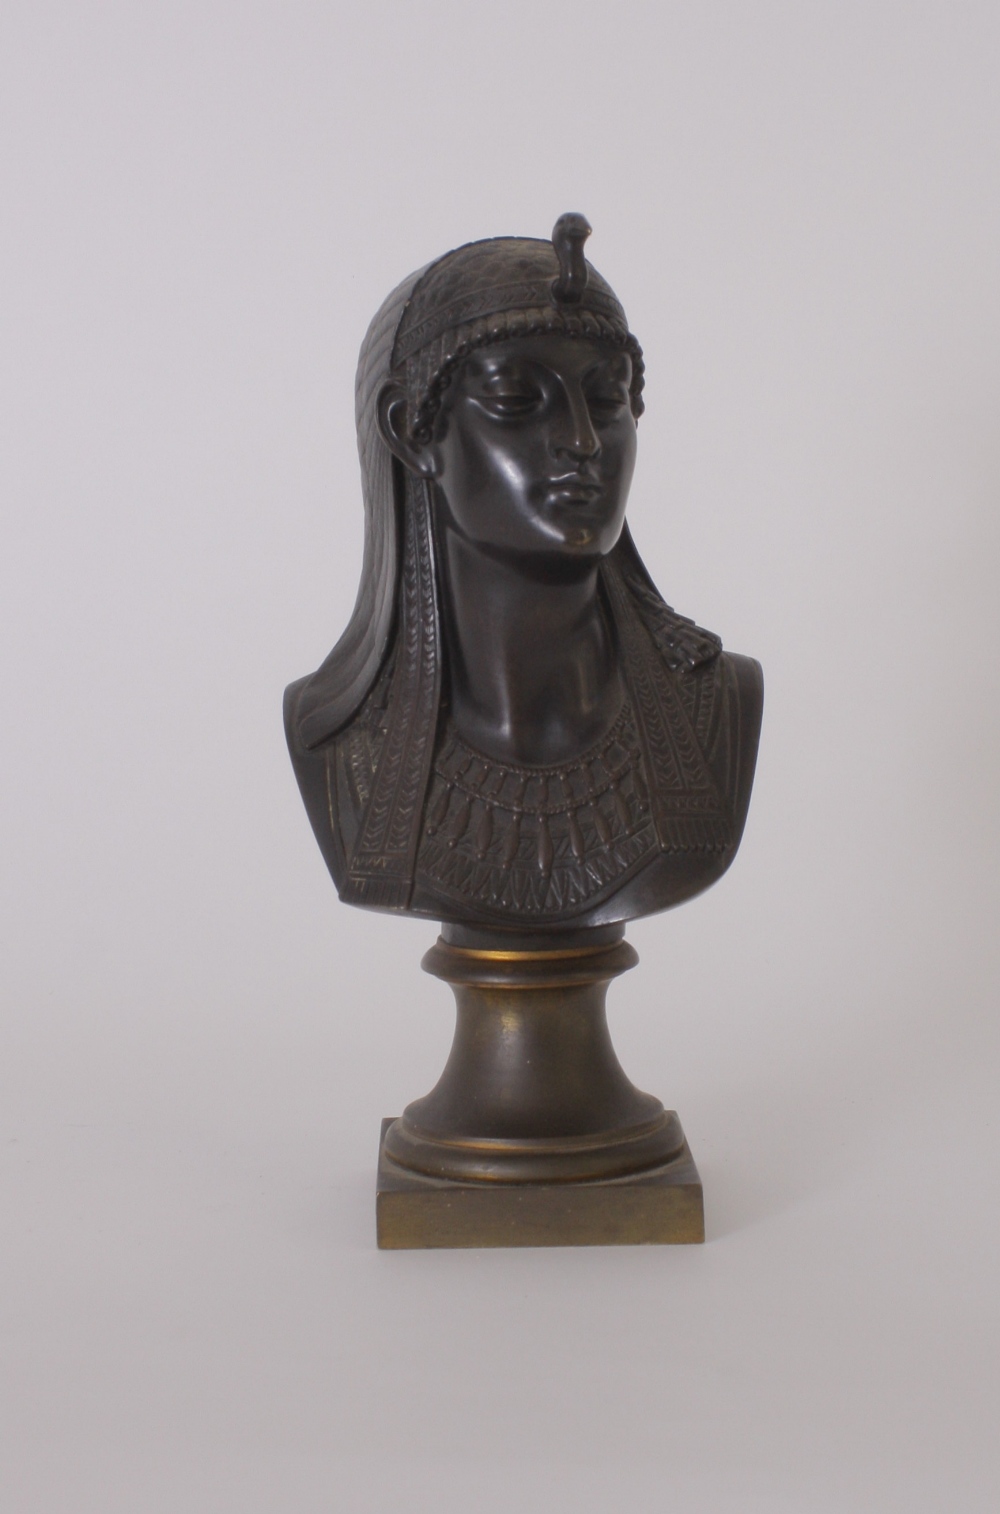 A 19th century orientalist bronze bust of an Egyptian Queen with an ibis headress facing to - Image 2 of 2